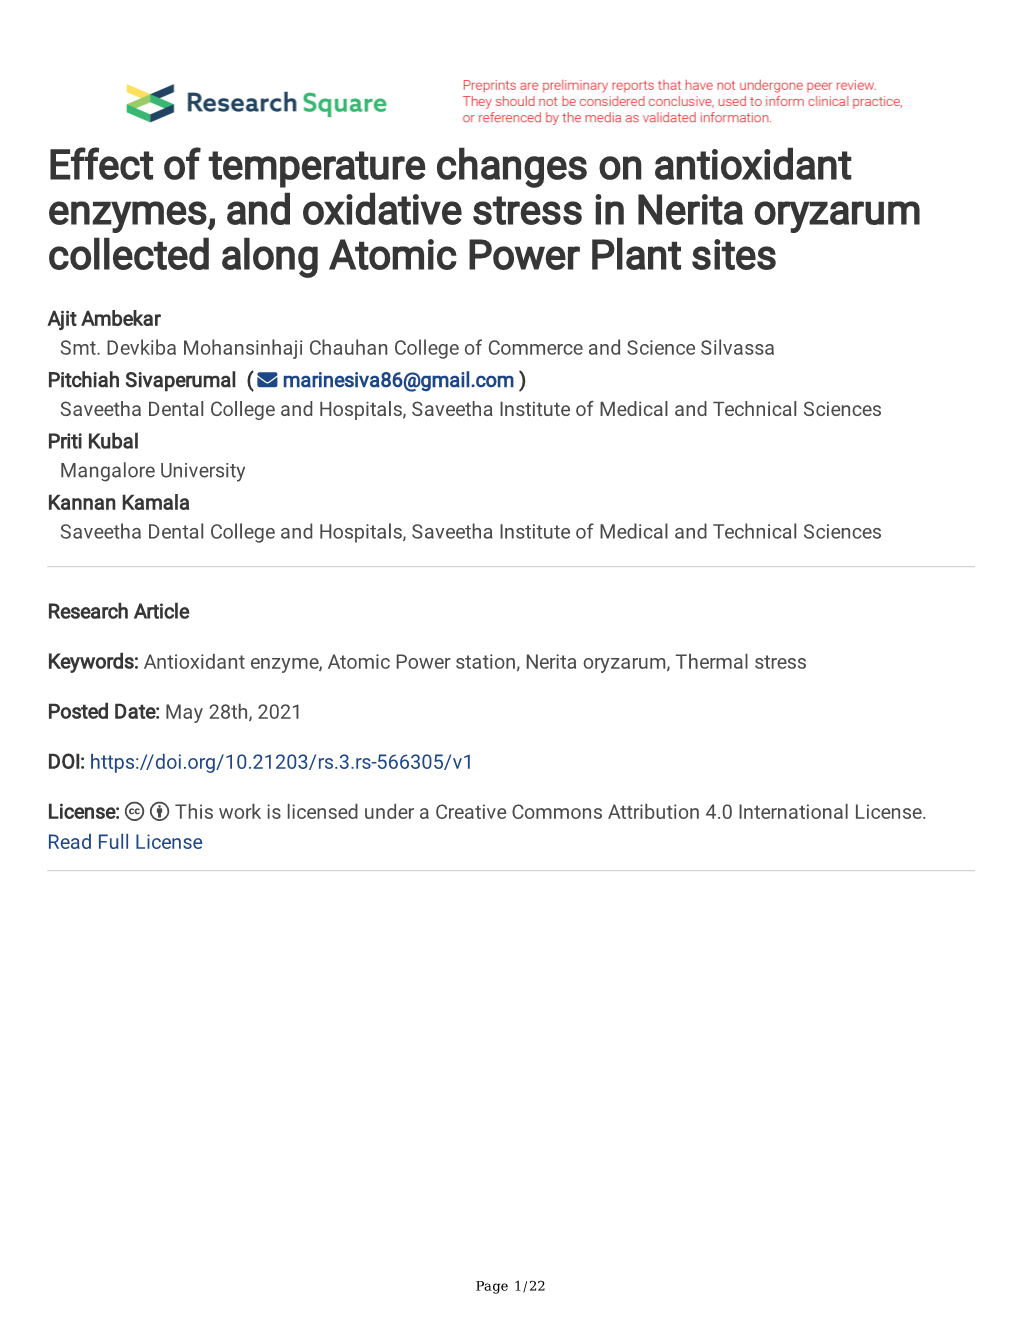 Effect of Temperature Changes on Antioxidant Enzymes, and Oxidative Stress in Nerita Oryzarum Collected Along Atomic Power Plant Sites